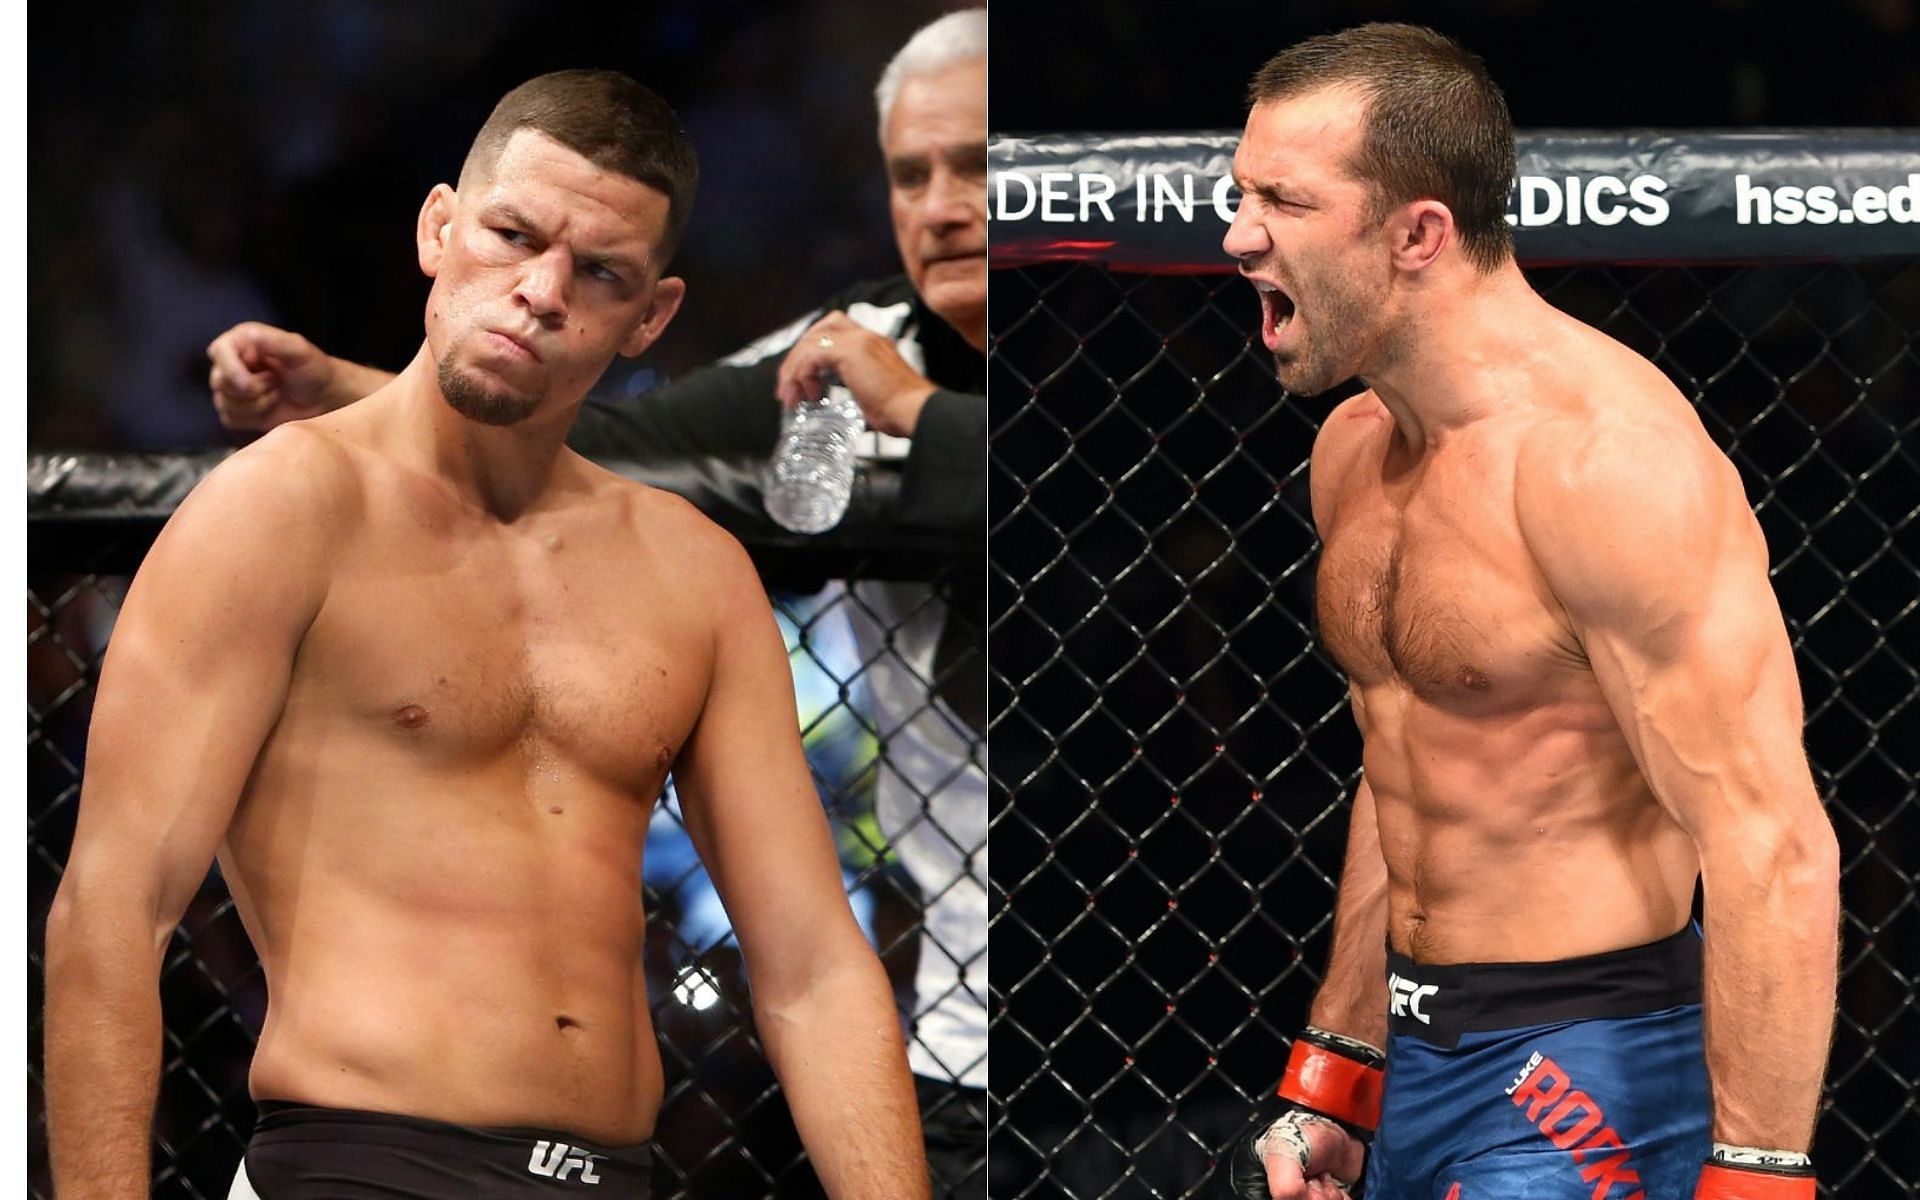 Nate Diaz (left) had a successful return to the octagon, while Luke Rockhold (right) suffered defeat